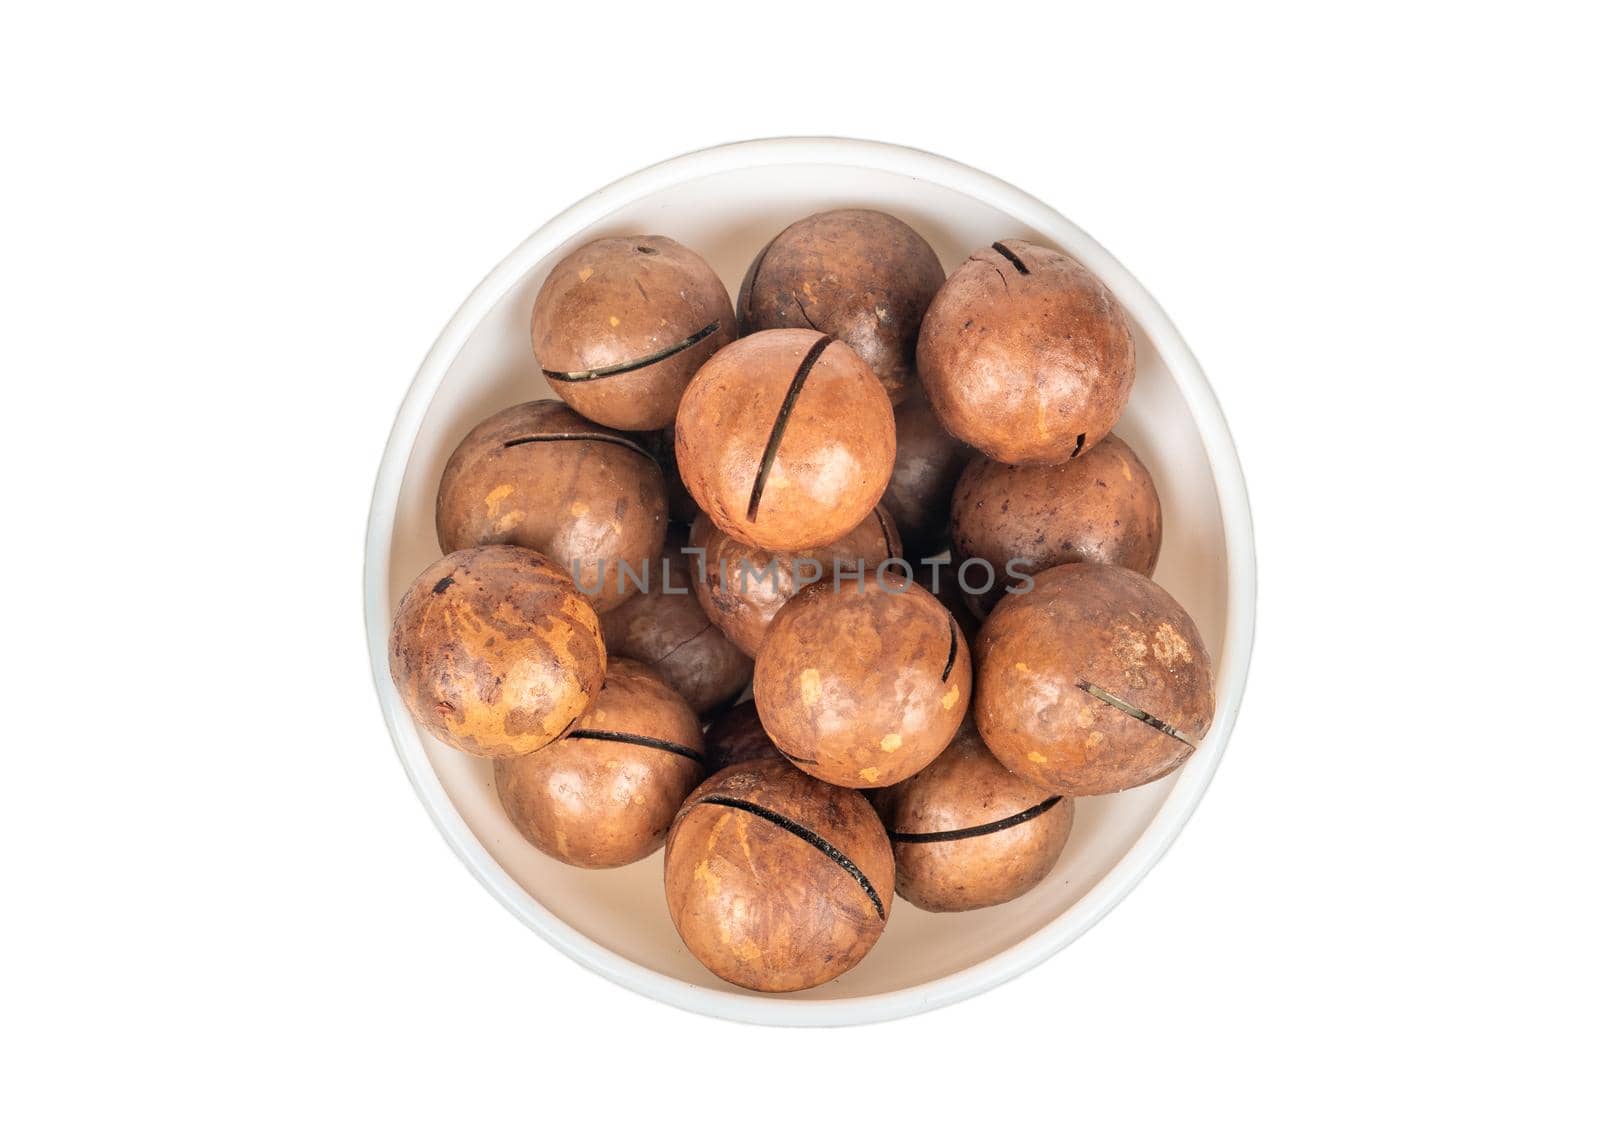 Macadamia nut in a ceramic bowl on a white background, top view